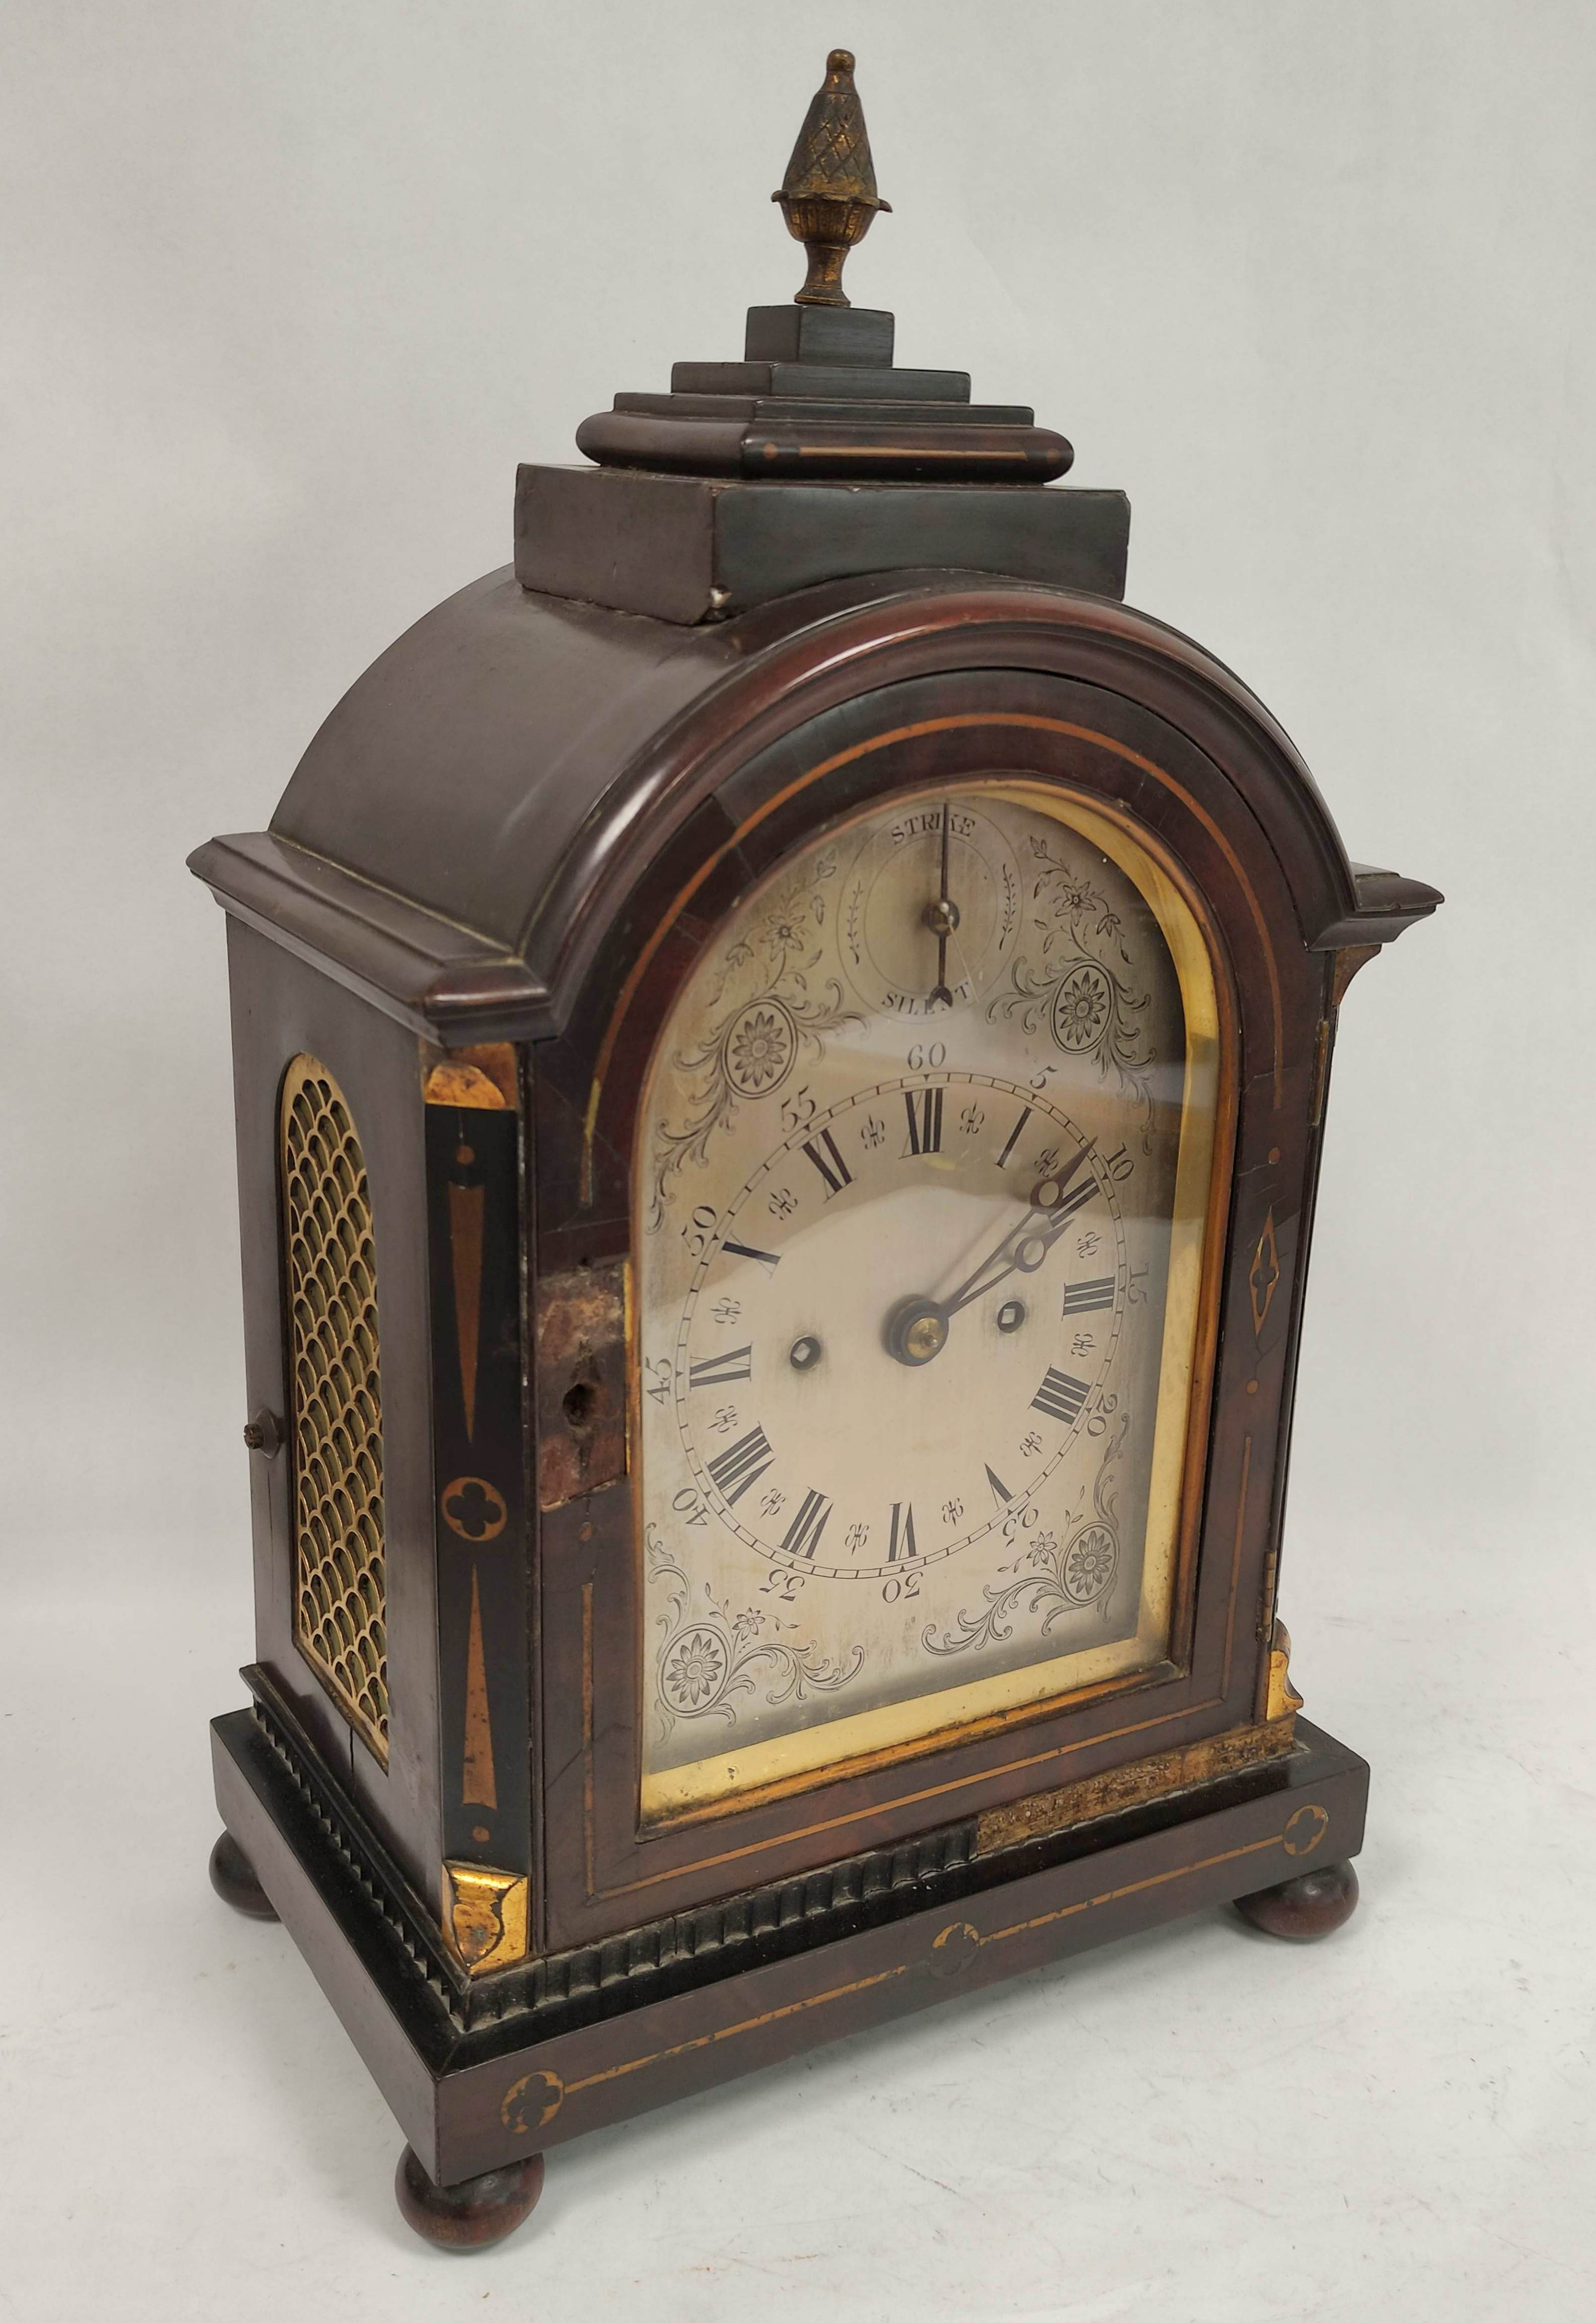 Late Georgian eight day mantel clock, unsigned, with substantial seven pillar anchor movement and